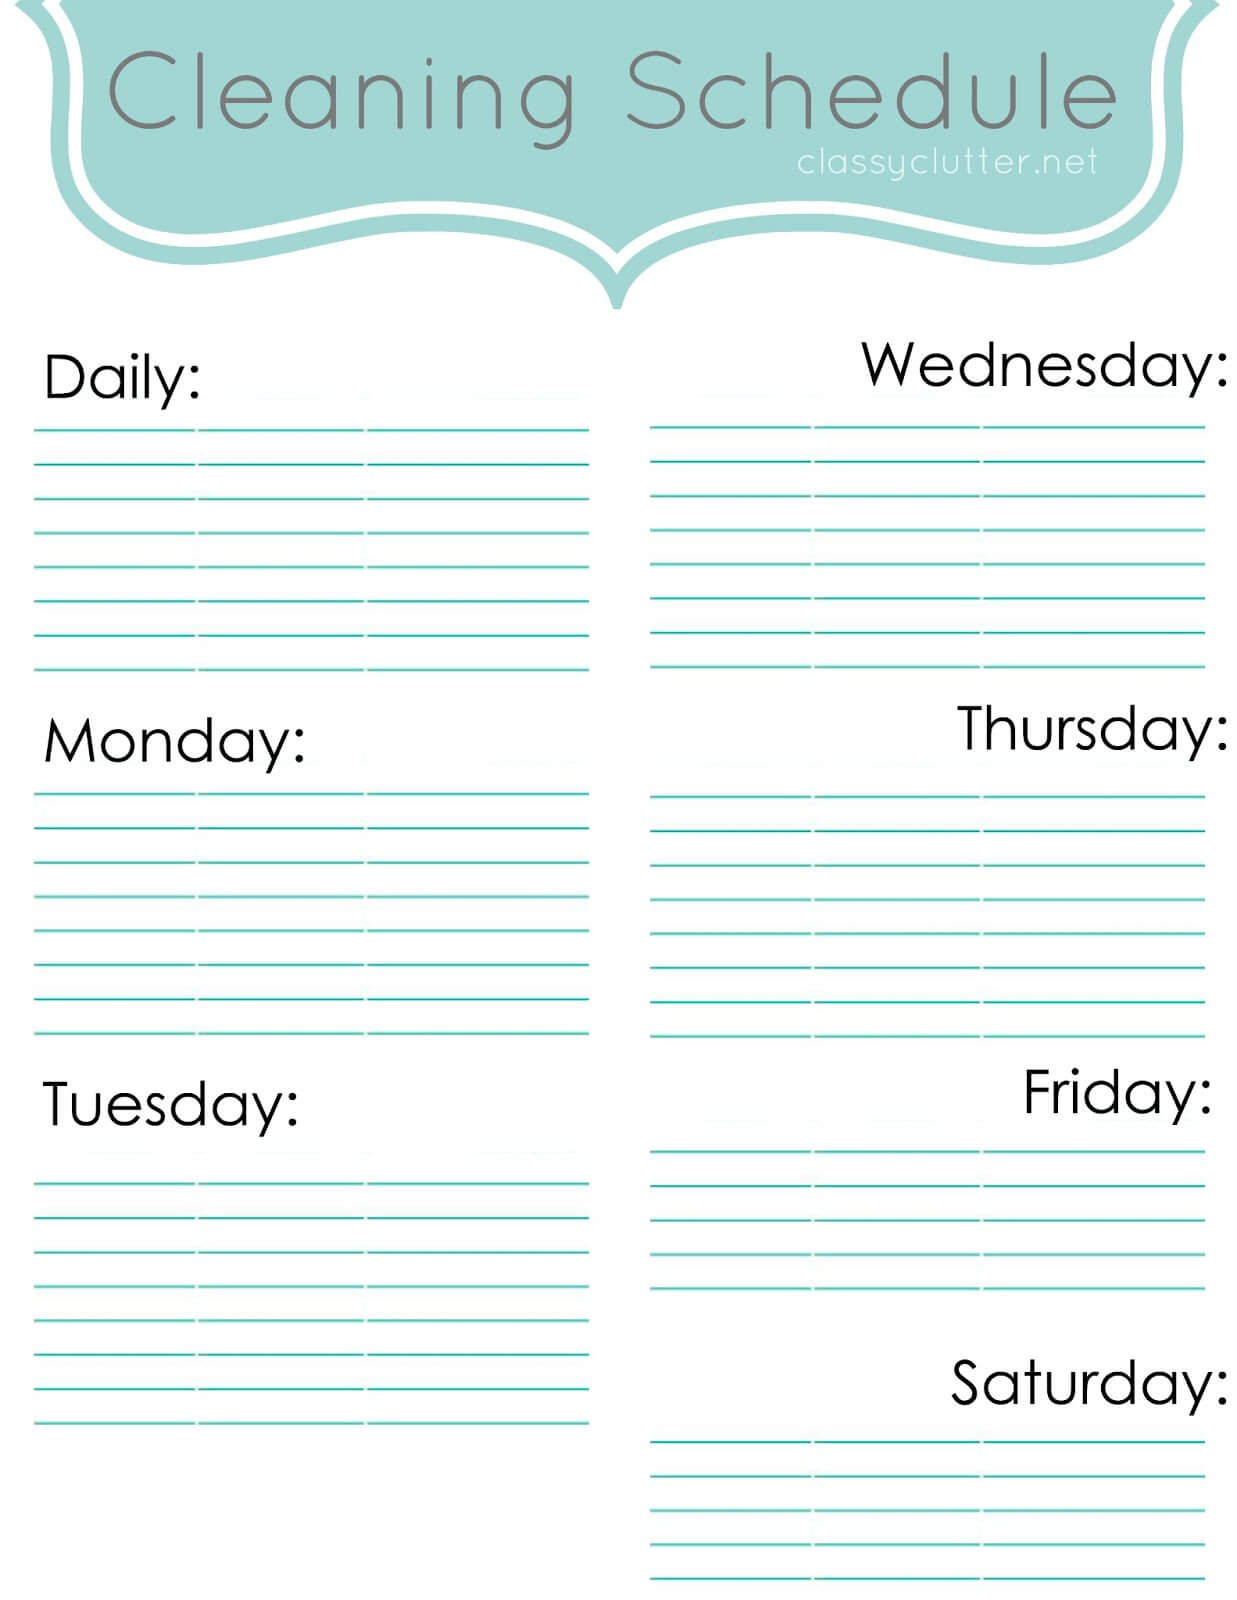 Weekly Cleaning Schedule: Improve Your Cleaning Habits For Blank Cleaning Schedule Template